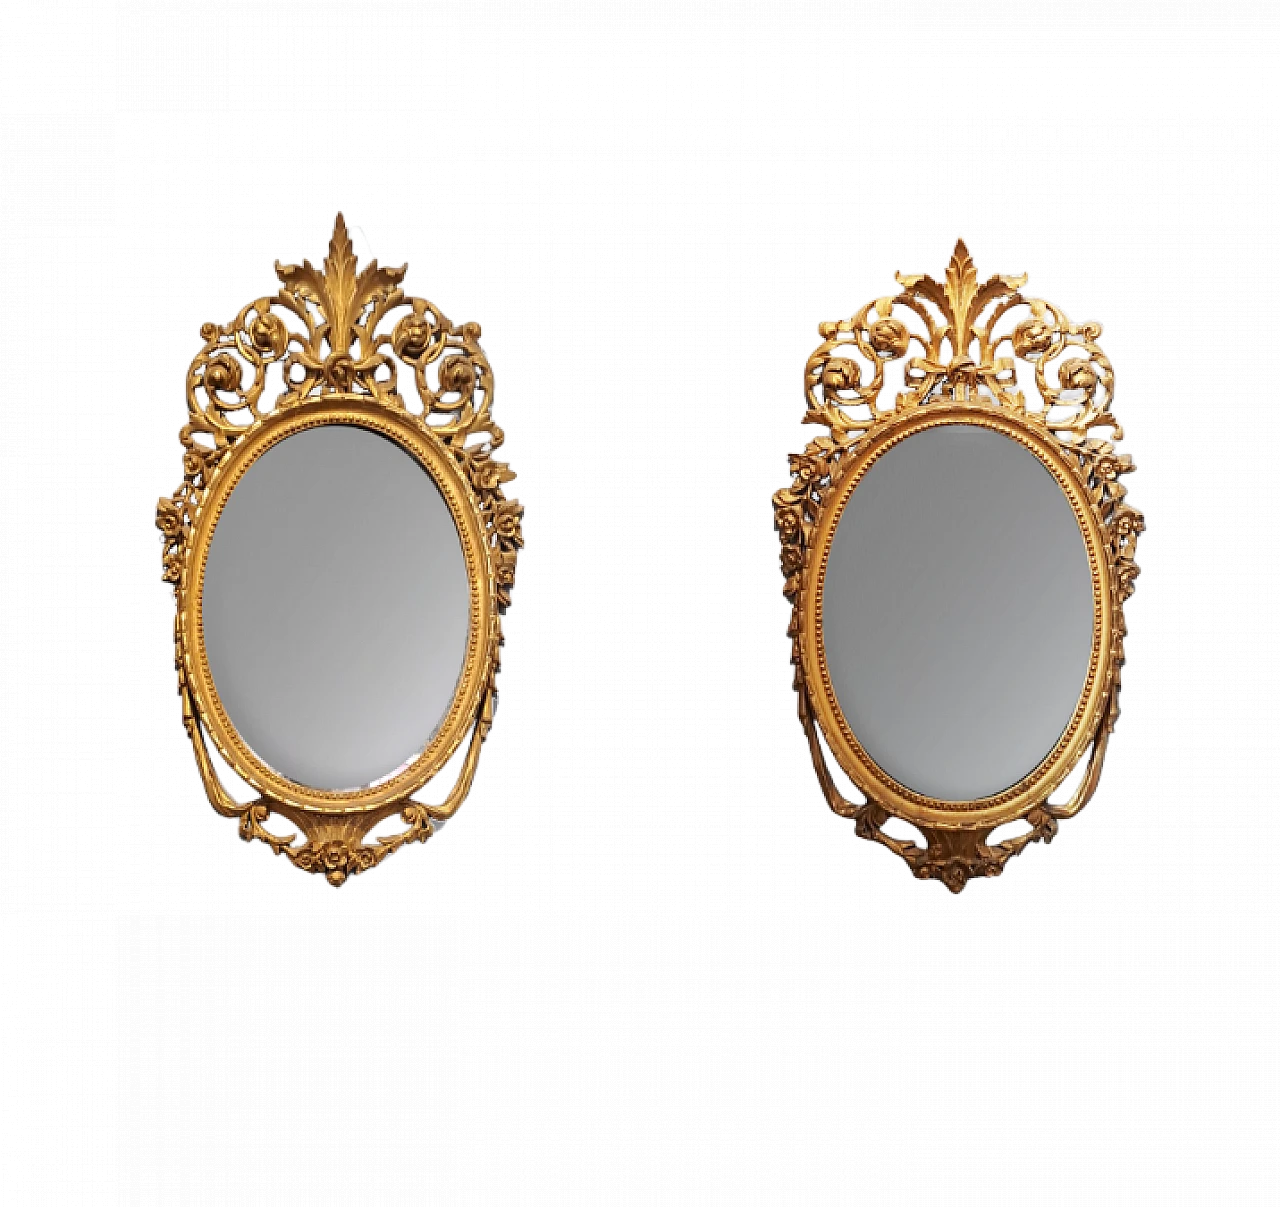 Pair of oval mirrors in wood gilded with gold leaf, late 18th century 8